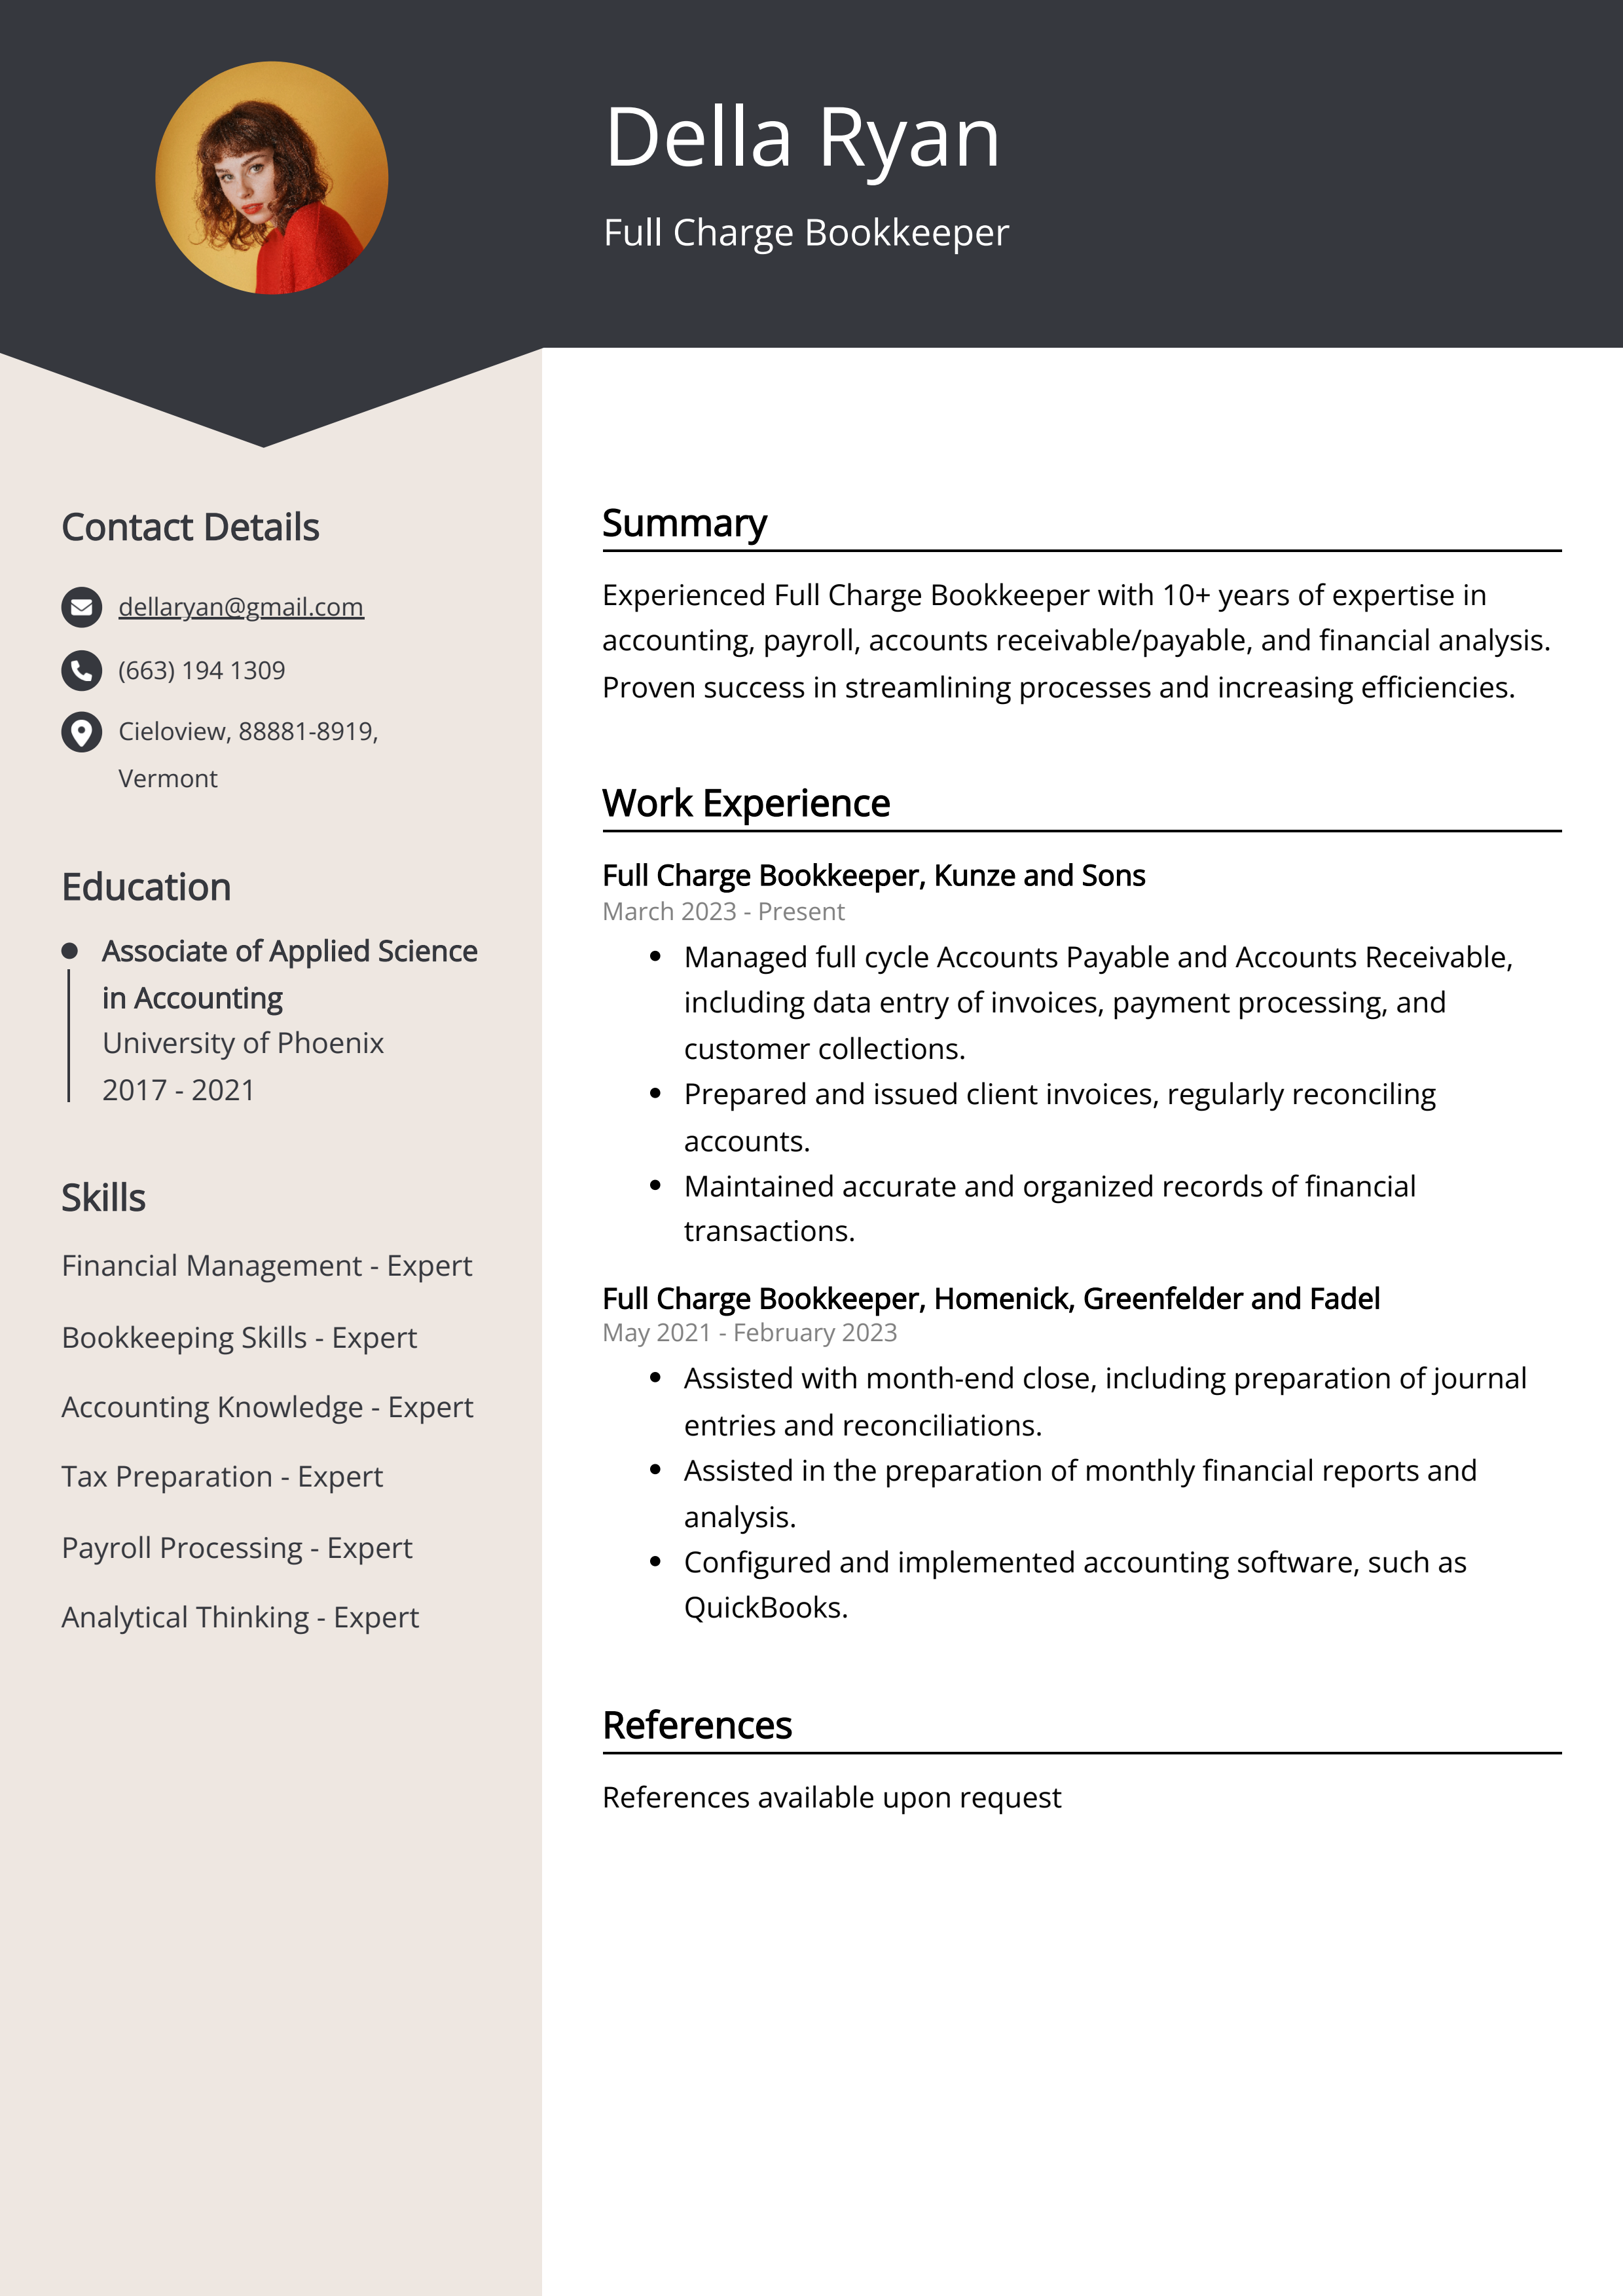 Full Charge Bookkeeper CV Example